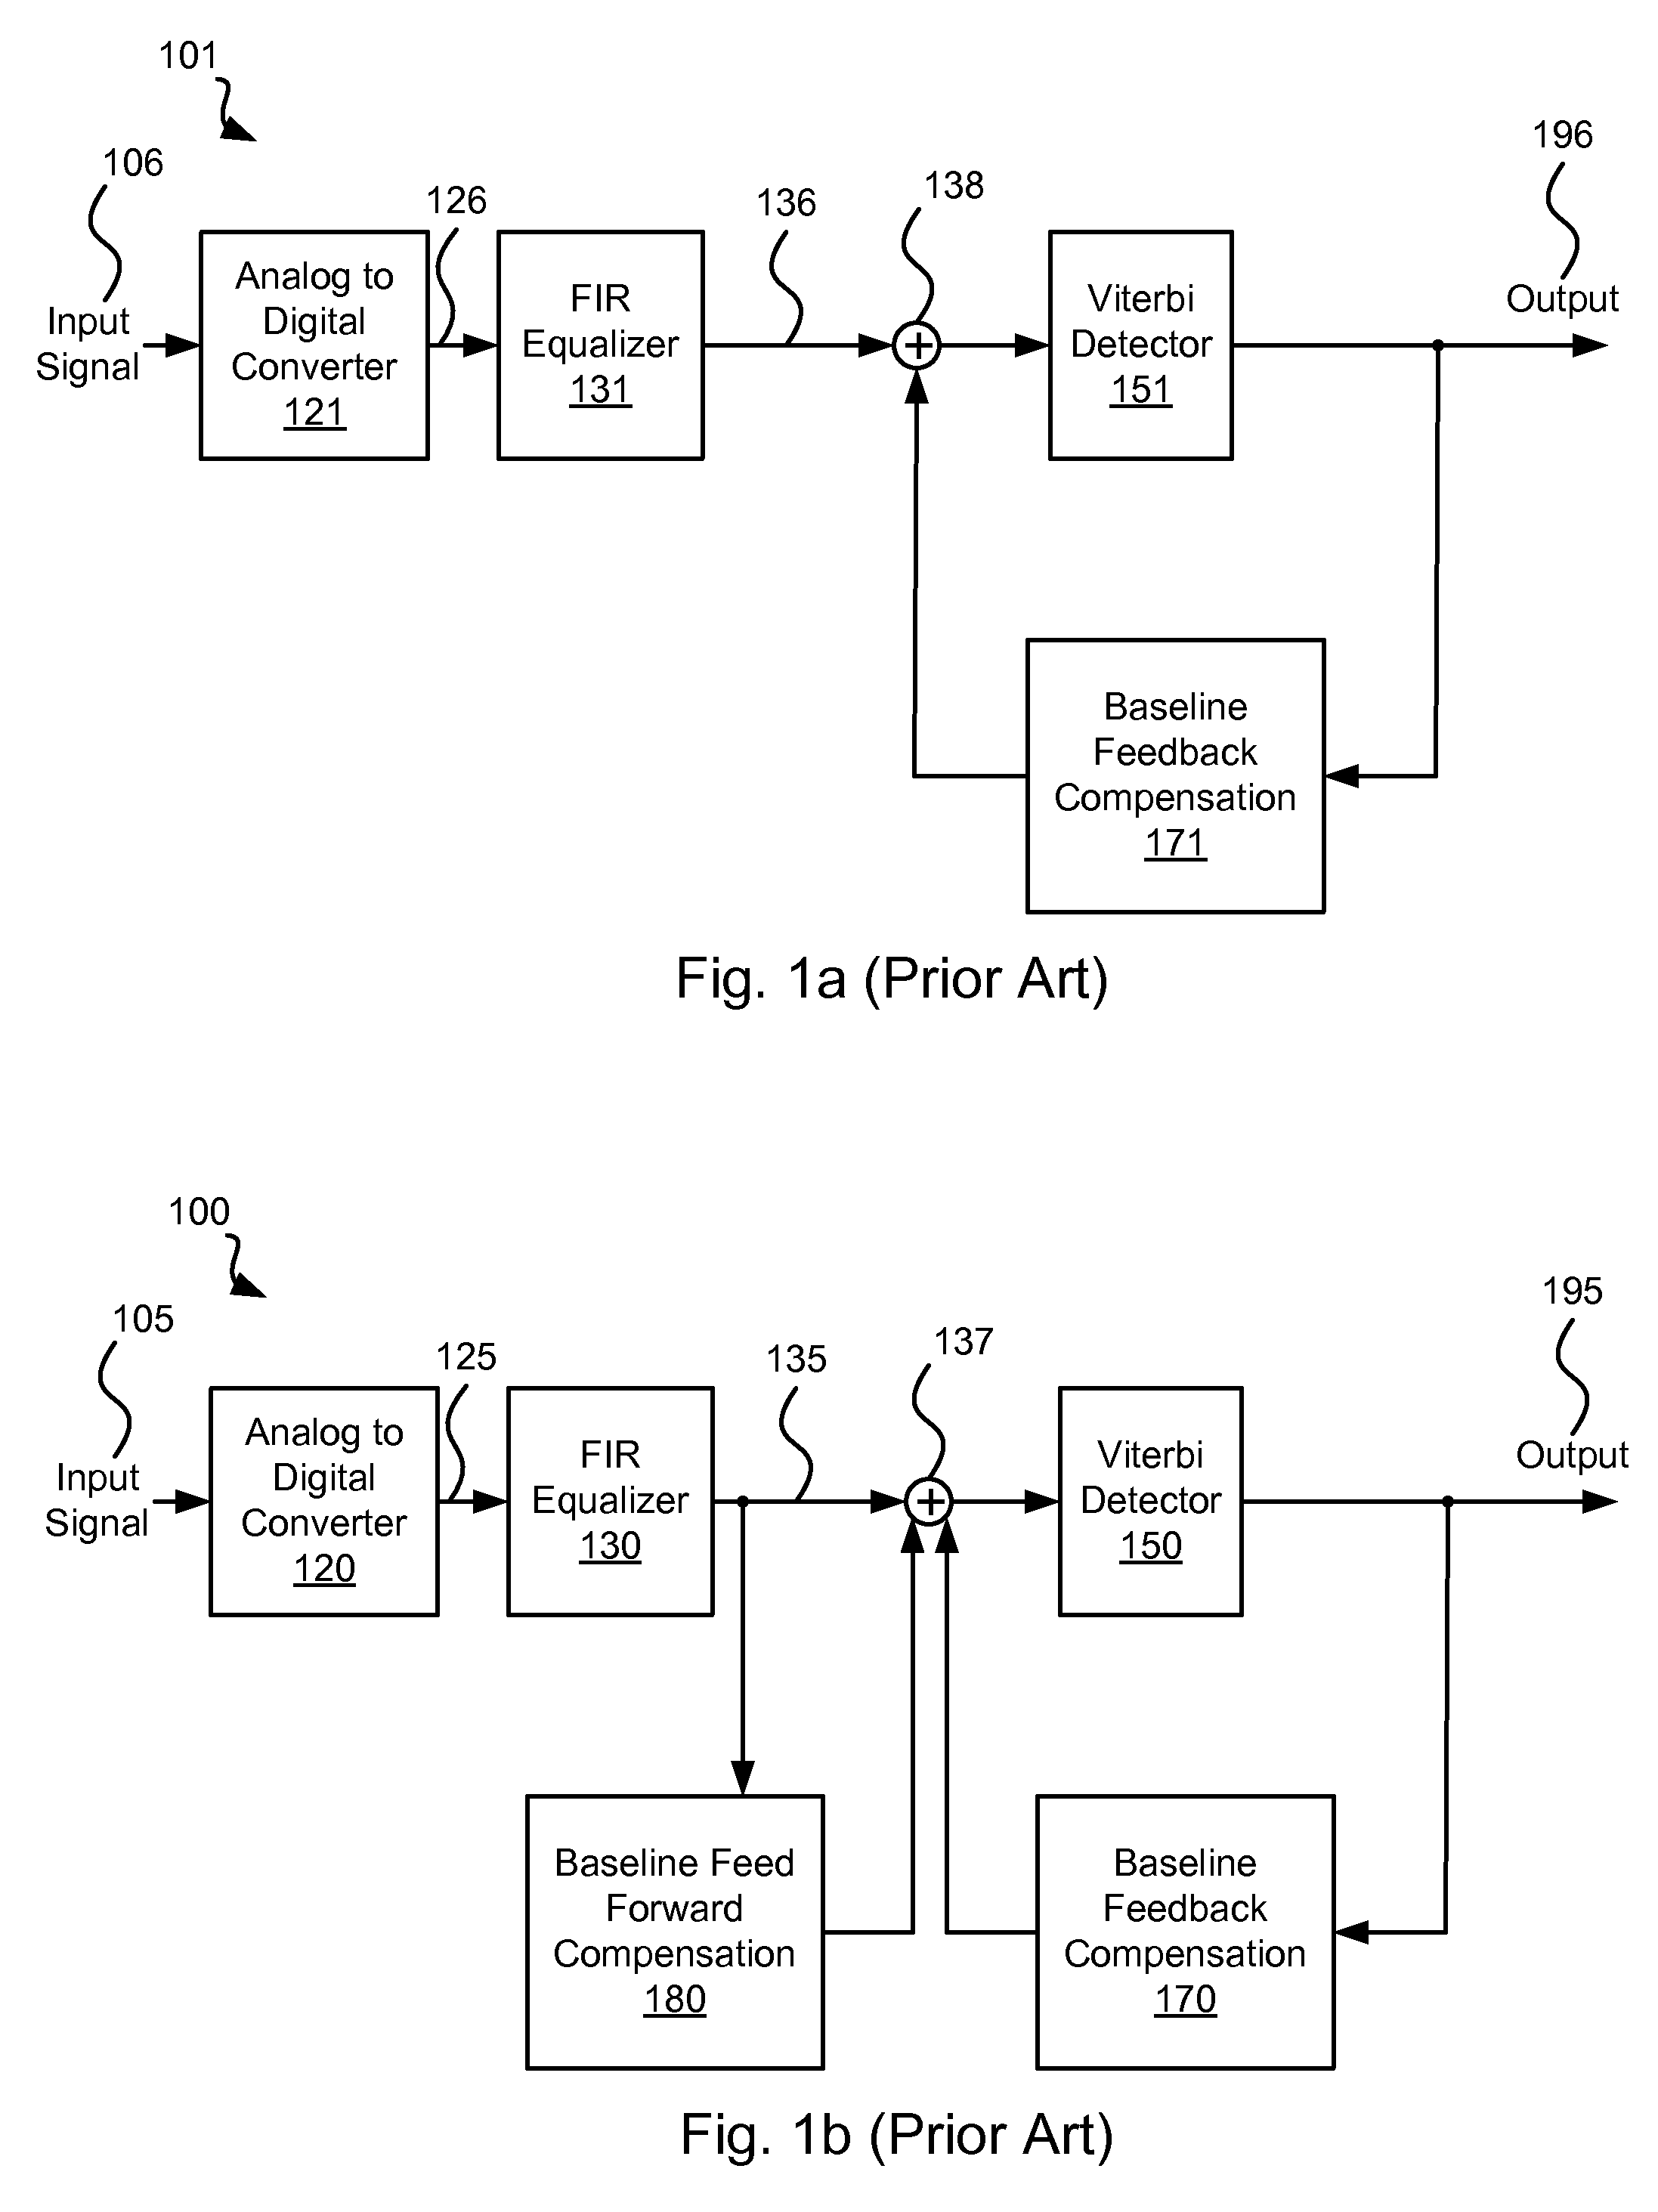 Systems and methods for compensating baseline wandering in perpendicular magnetic recording